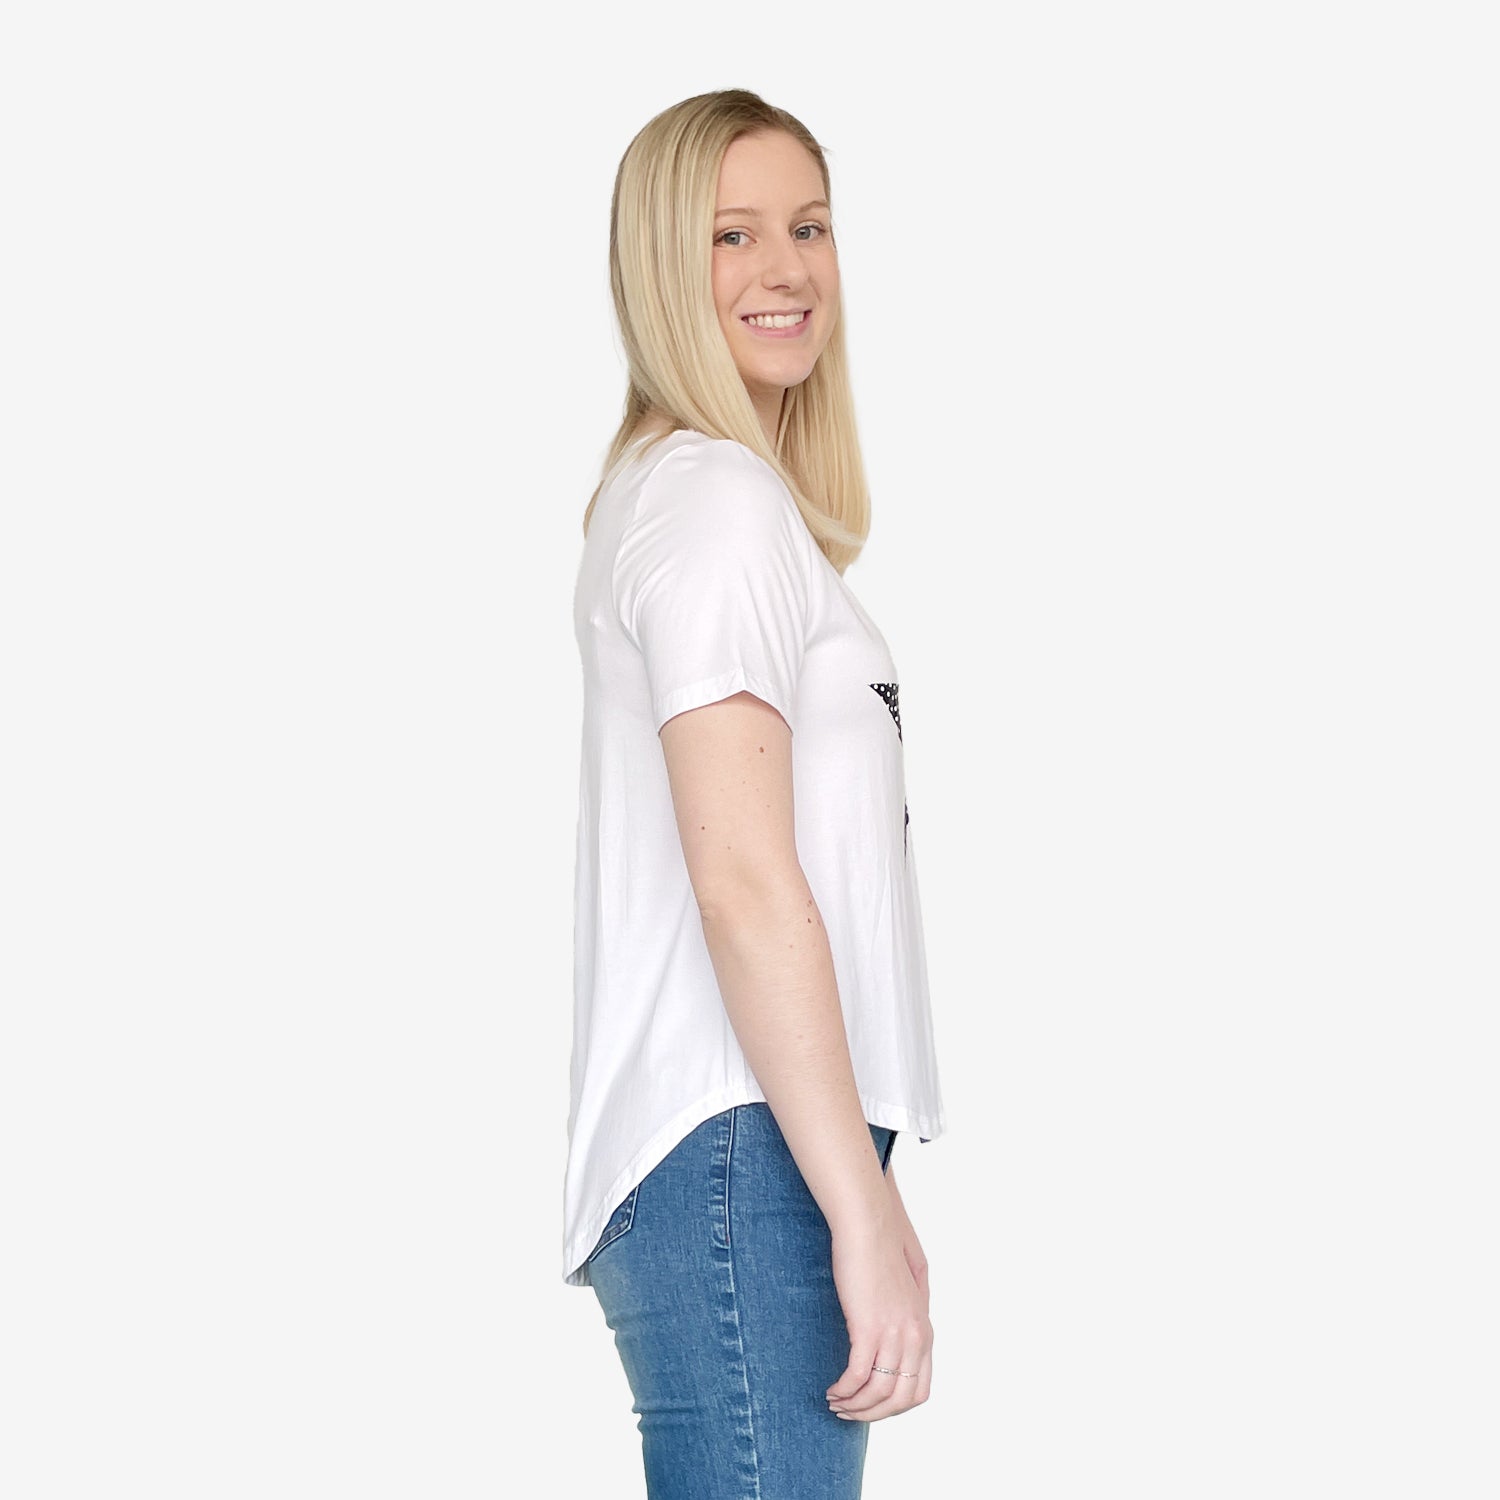 Upgrade your wardrobe sustainably with our white bamboo t-shirt, adorned with a stylish star print. Get yours today!